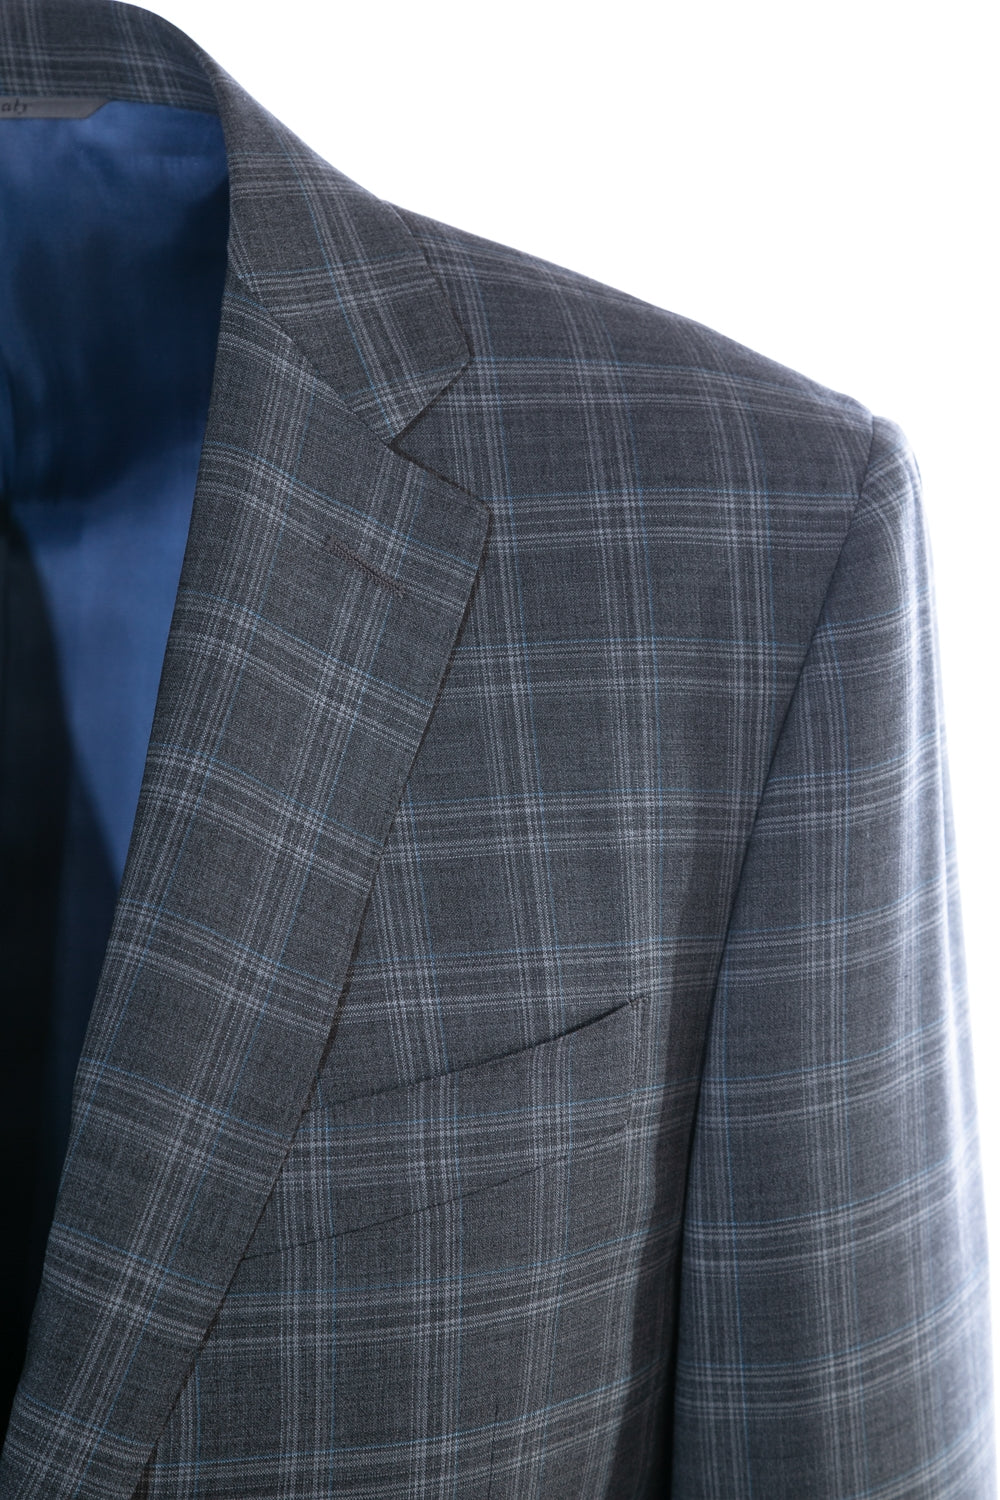 Canali Grey Check Suit in Grey Check Lapel